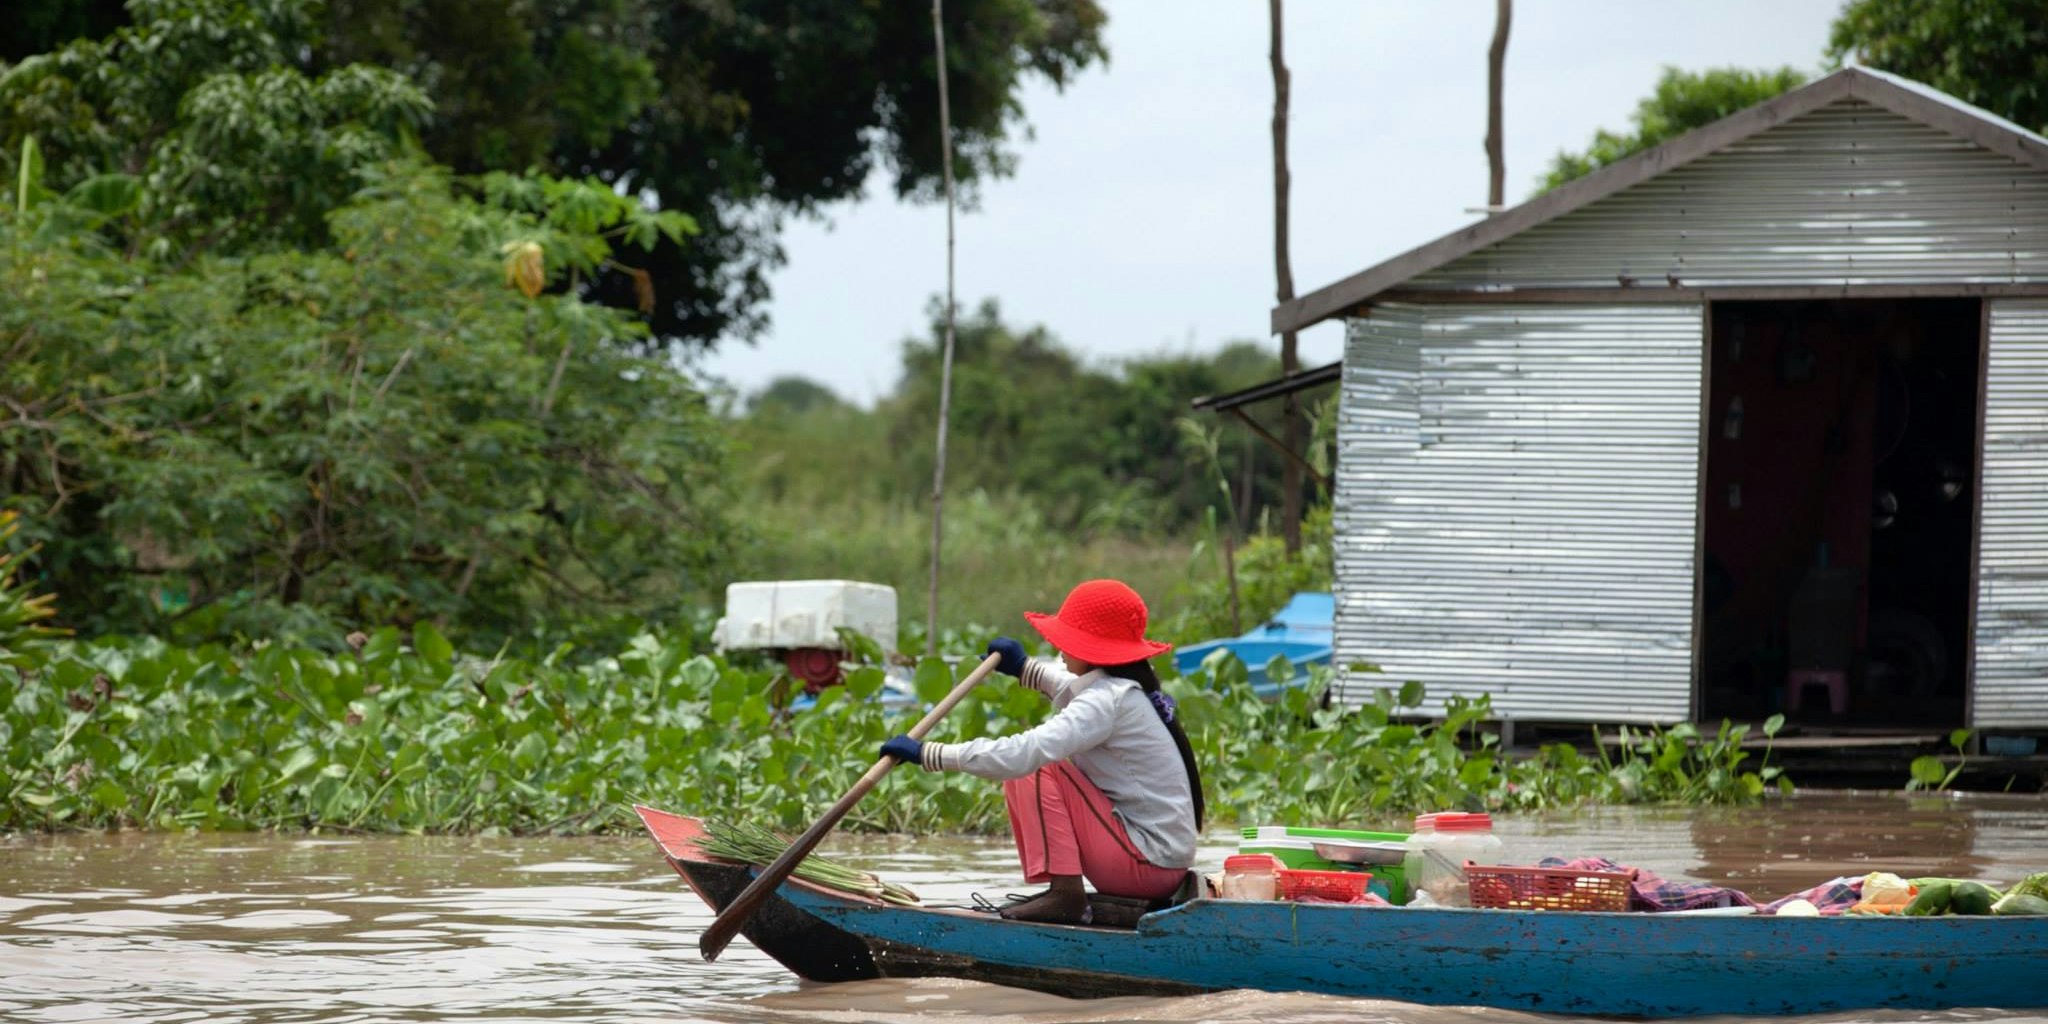 Photos That Will Make You Want To Sell Your Belongings and Move to a Floating Village